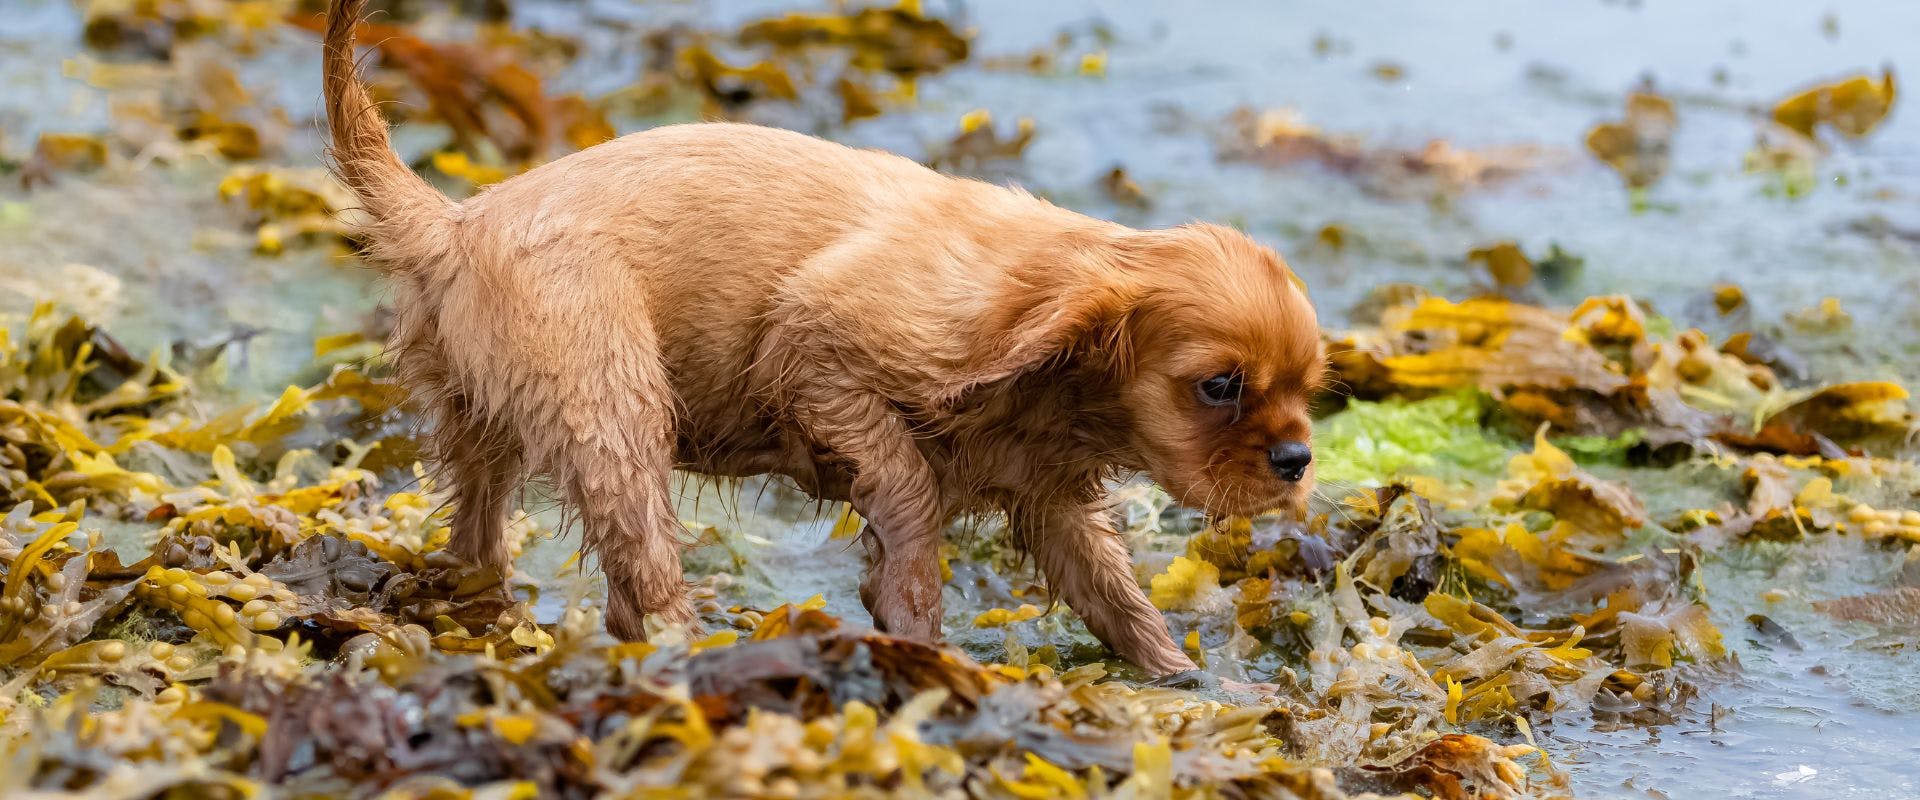 Puppy walking amongst seaweed at the beach